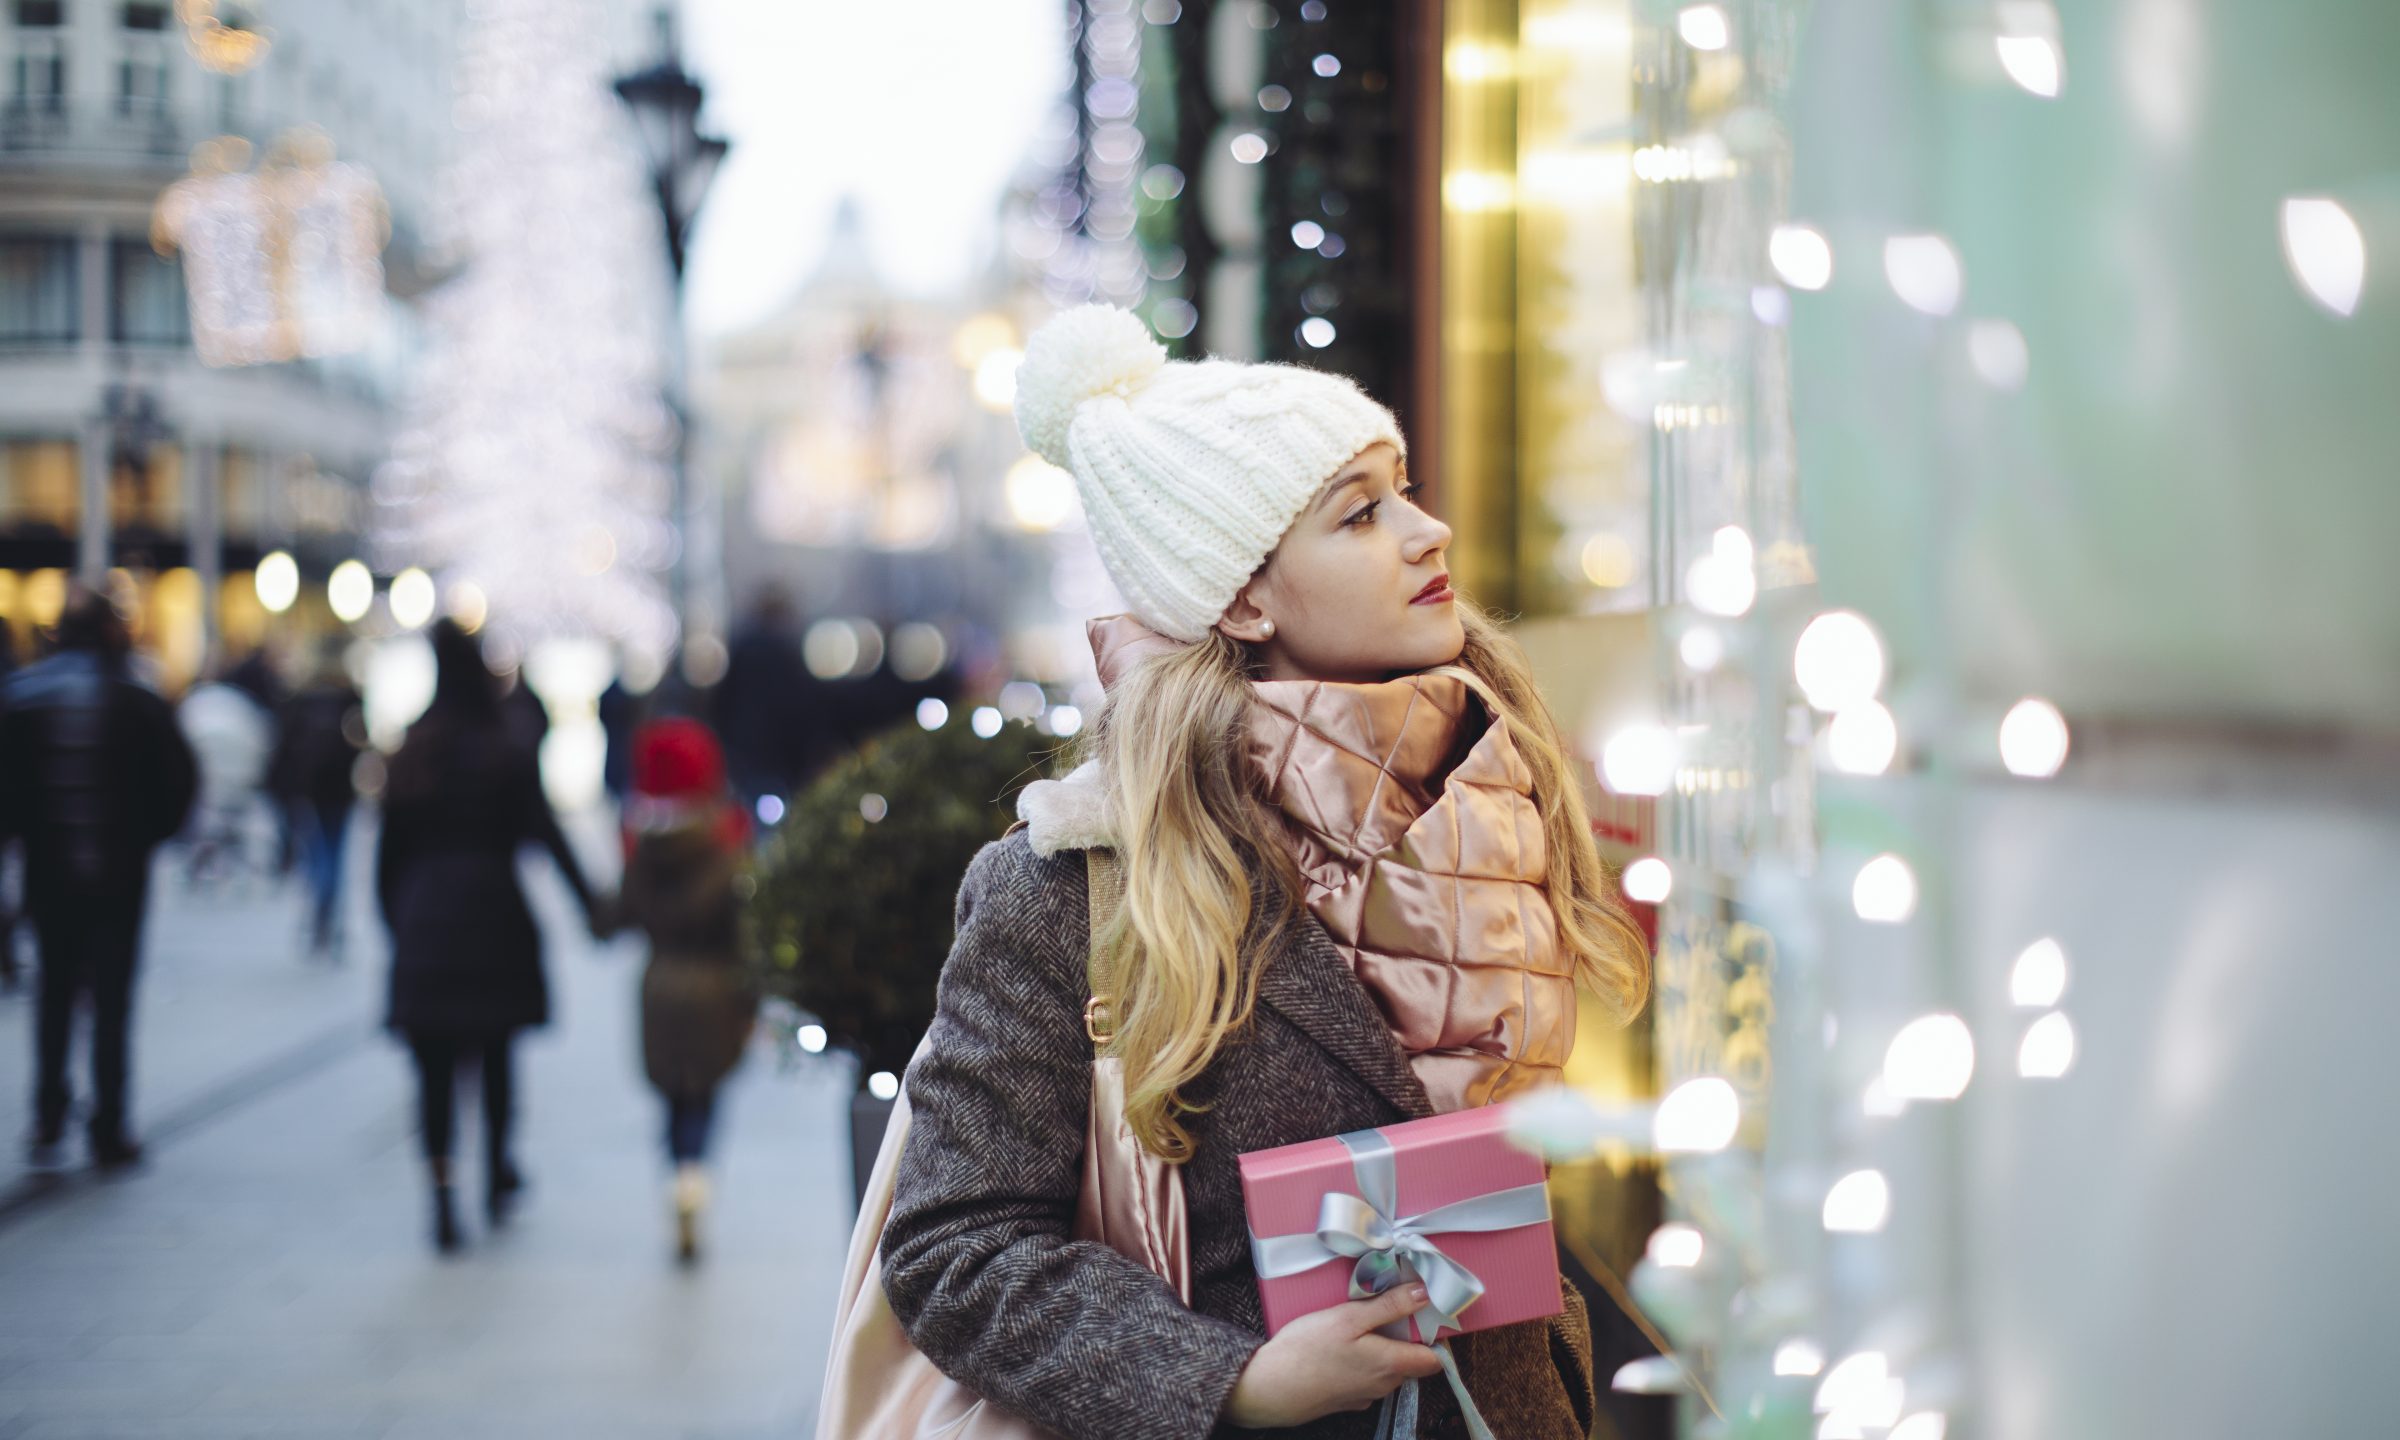 Late on Your Holiday Shopping? Bag Some Last-Minute Savings - NerdWallet